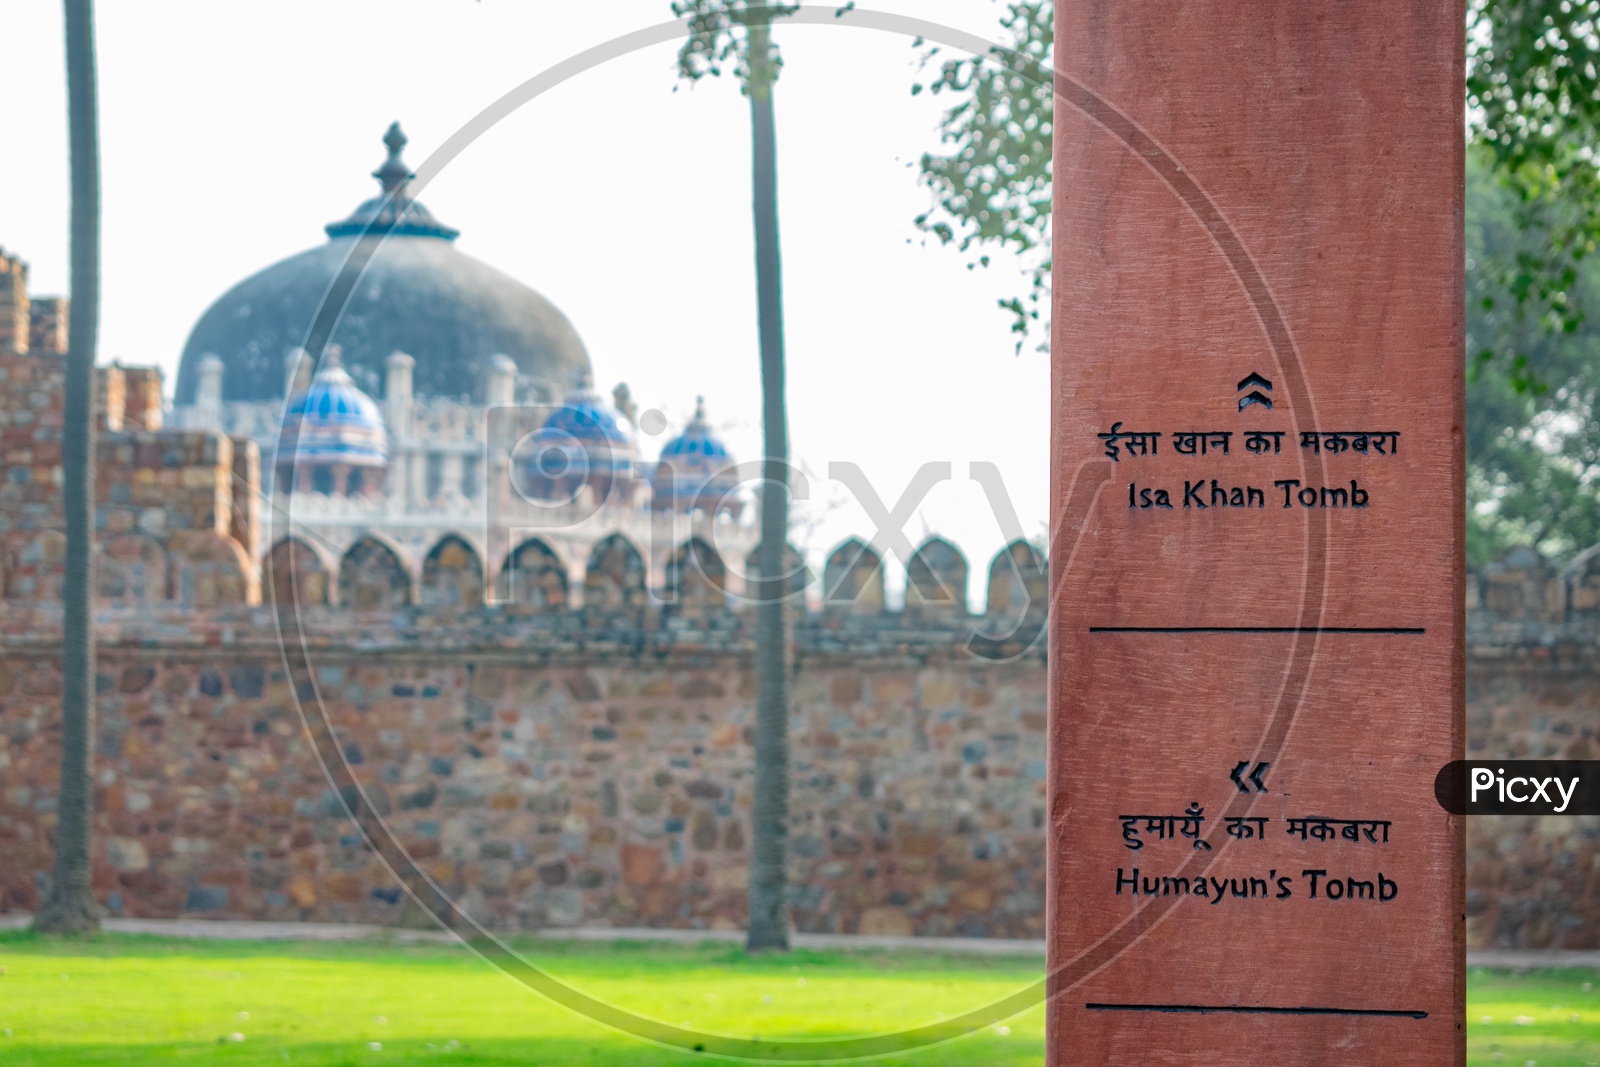 Sign board for Humayun's Tomb and Isa Khan Tomb and Isa Khan Tomb in the background